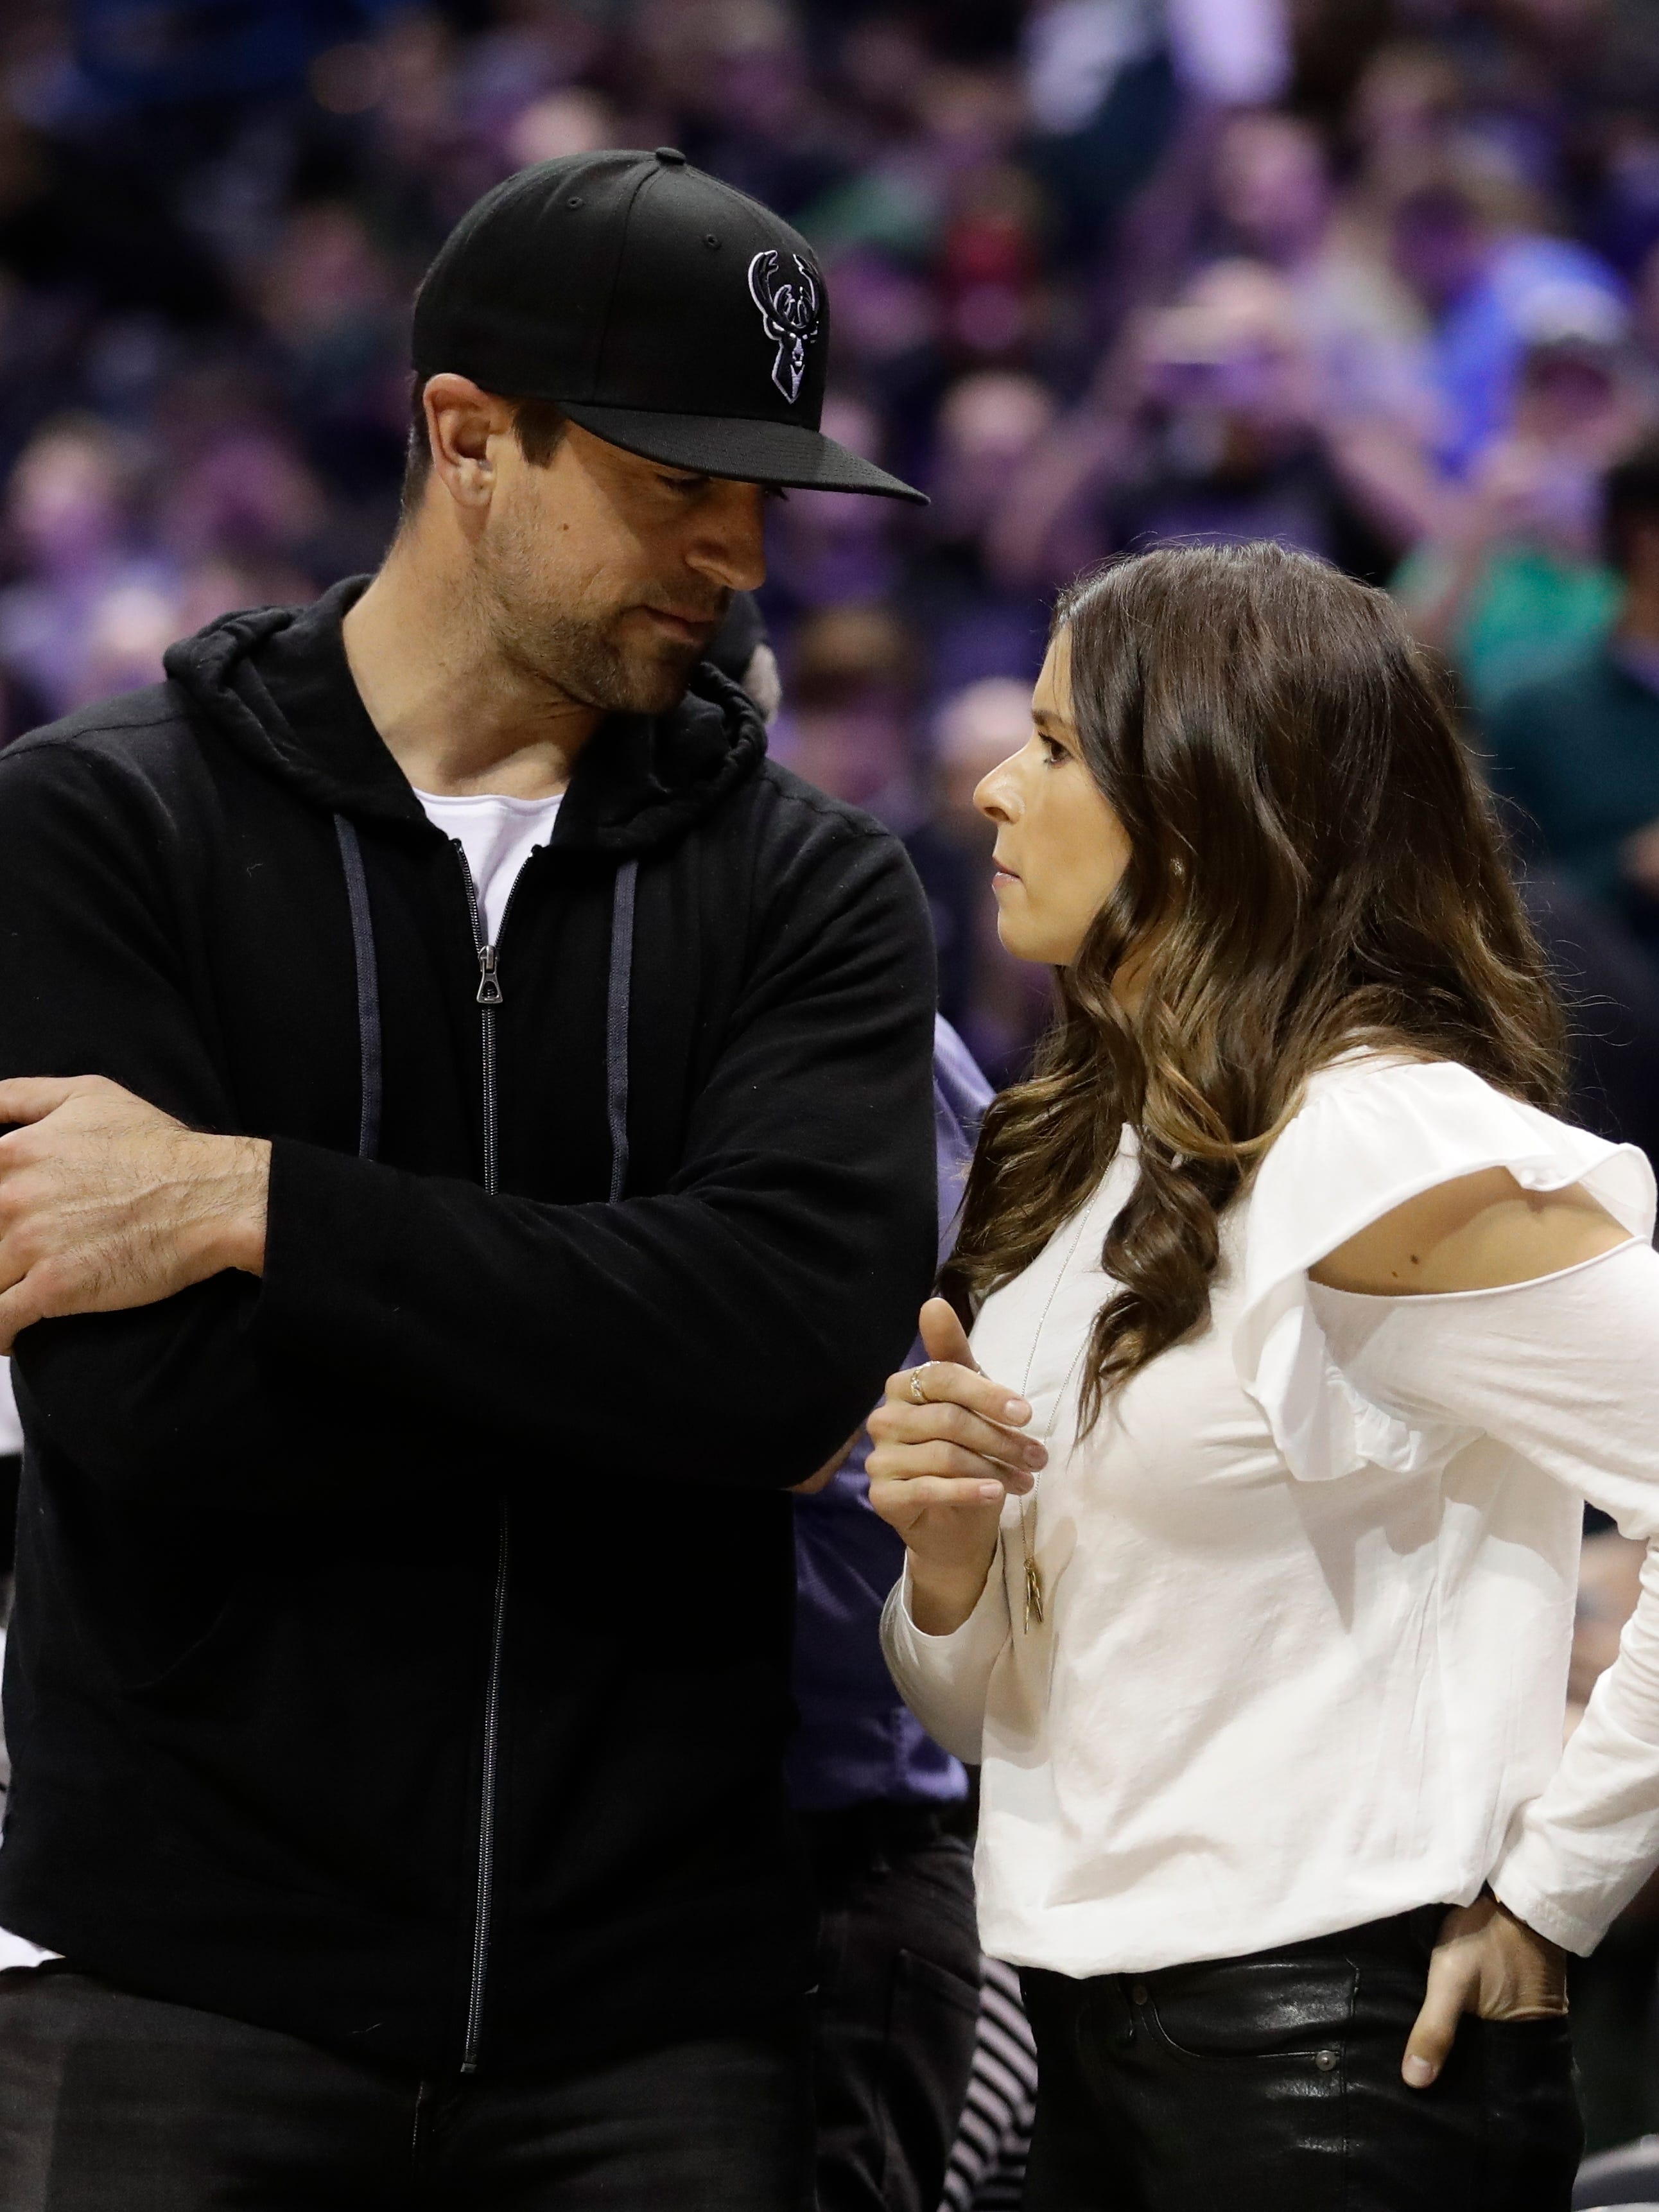 Green Bay Packers' Aaron Rodgers talks with Danica Patrick at Game 3 of the playoff series between the Bucks and the Celtics.